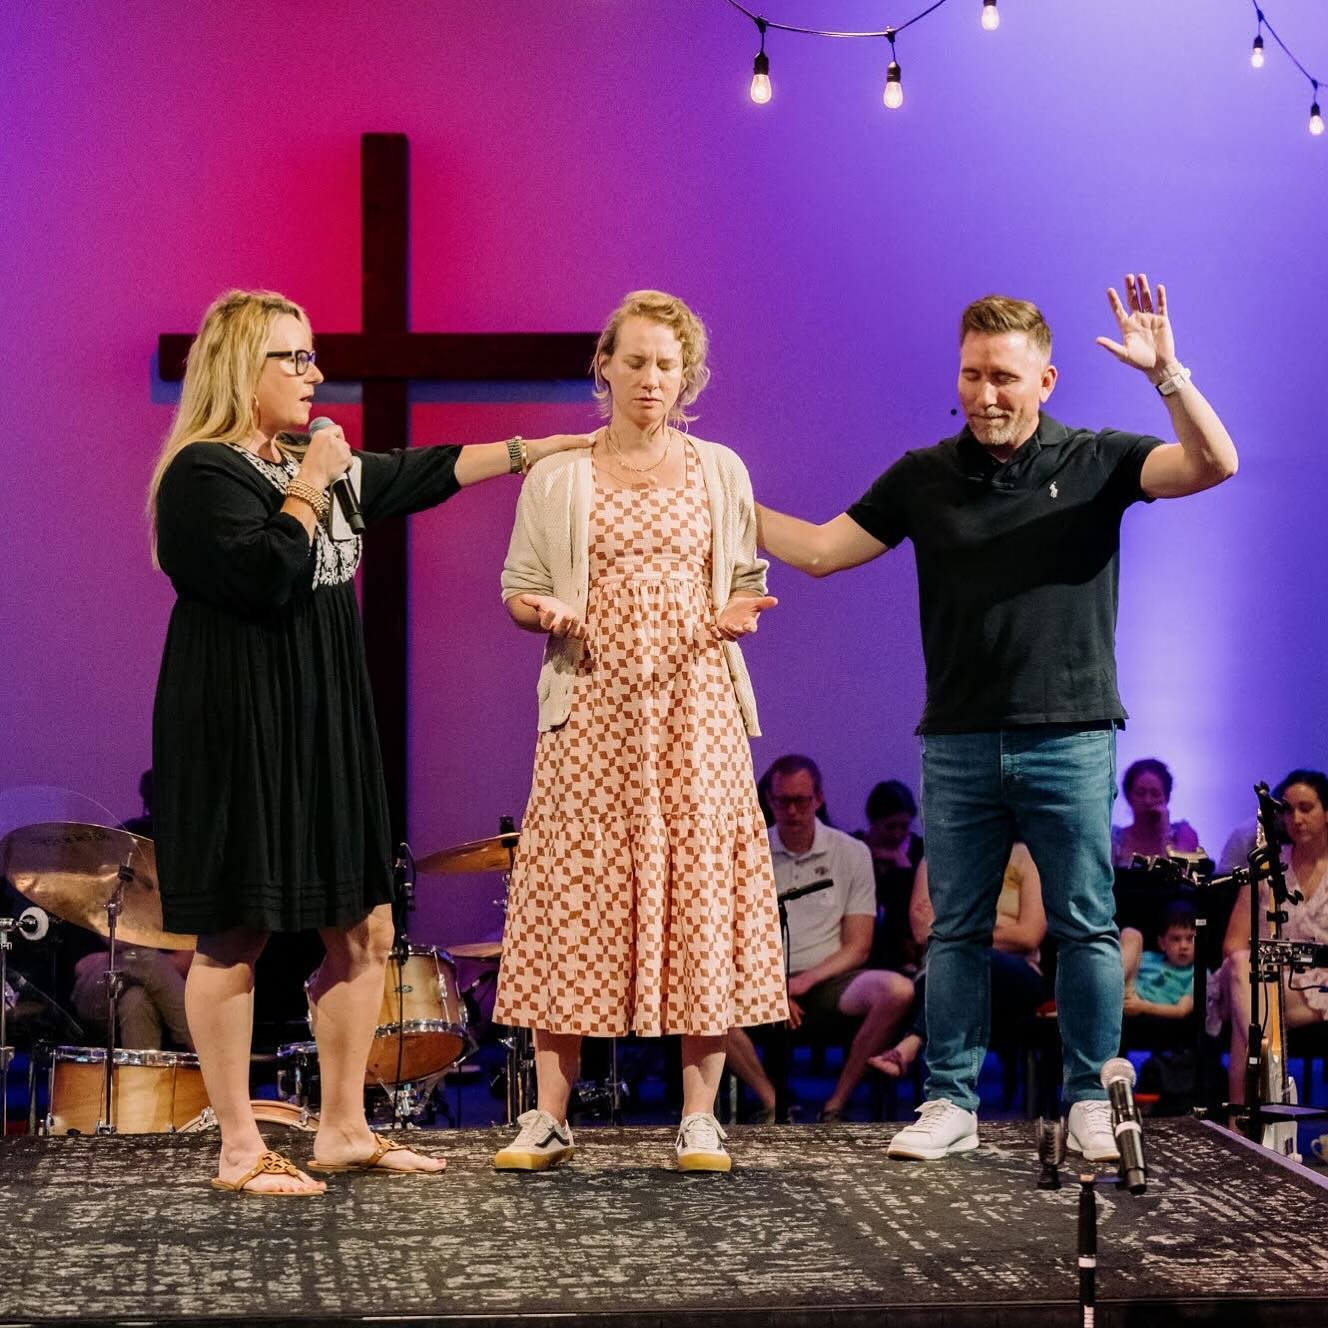 We are thrilled to welcome Melissa Snow as our new Director of Women&rsquo;s Ministries! 🙌🏽 Melissa has been an incredible volunteer speaker, service leader, and member of the women&rsquo;s ministry team. Her passion and dedication are truly inspir